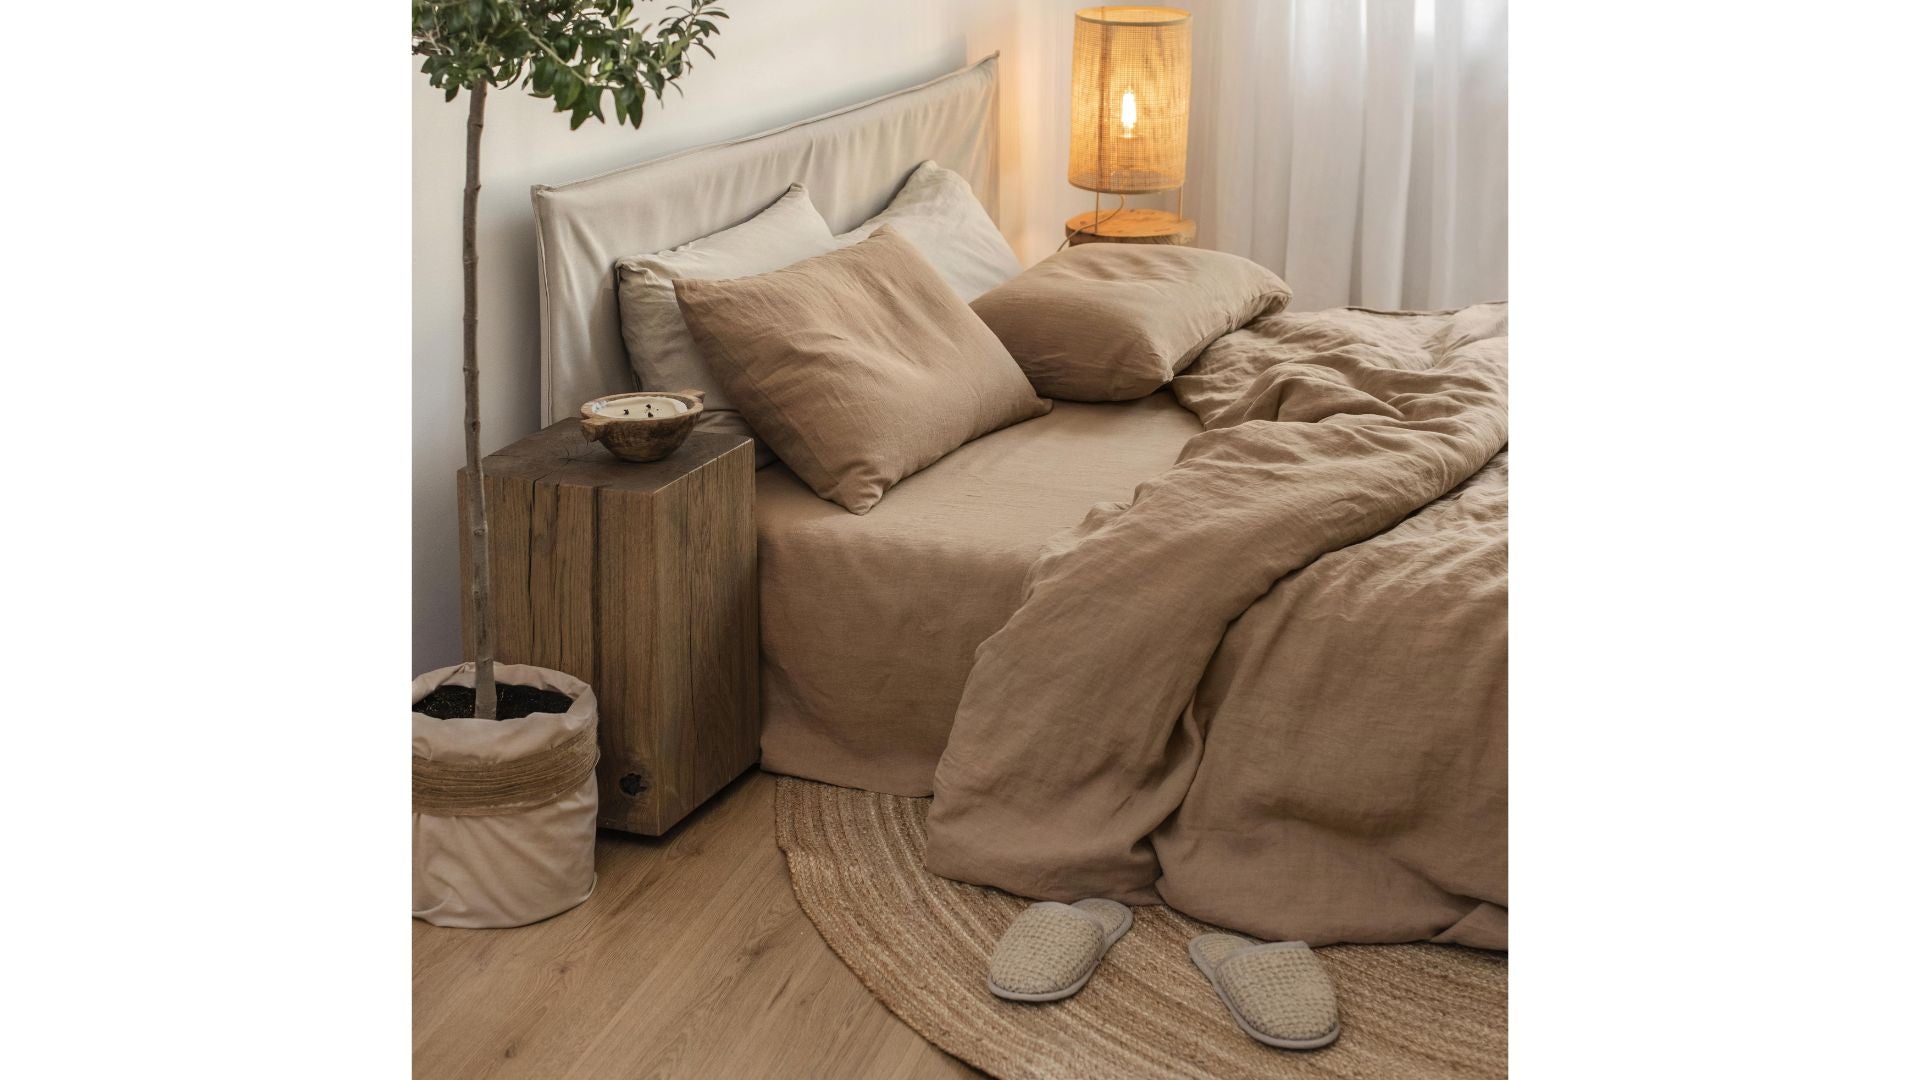 Hygge -  5 Tips for Cozy and Content Days - MagicLinen